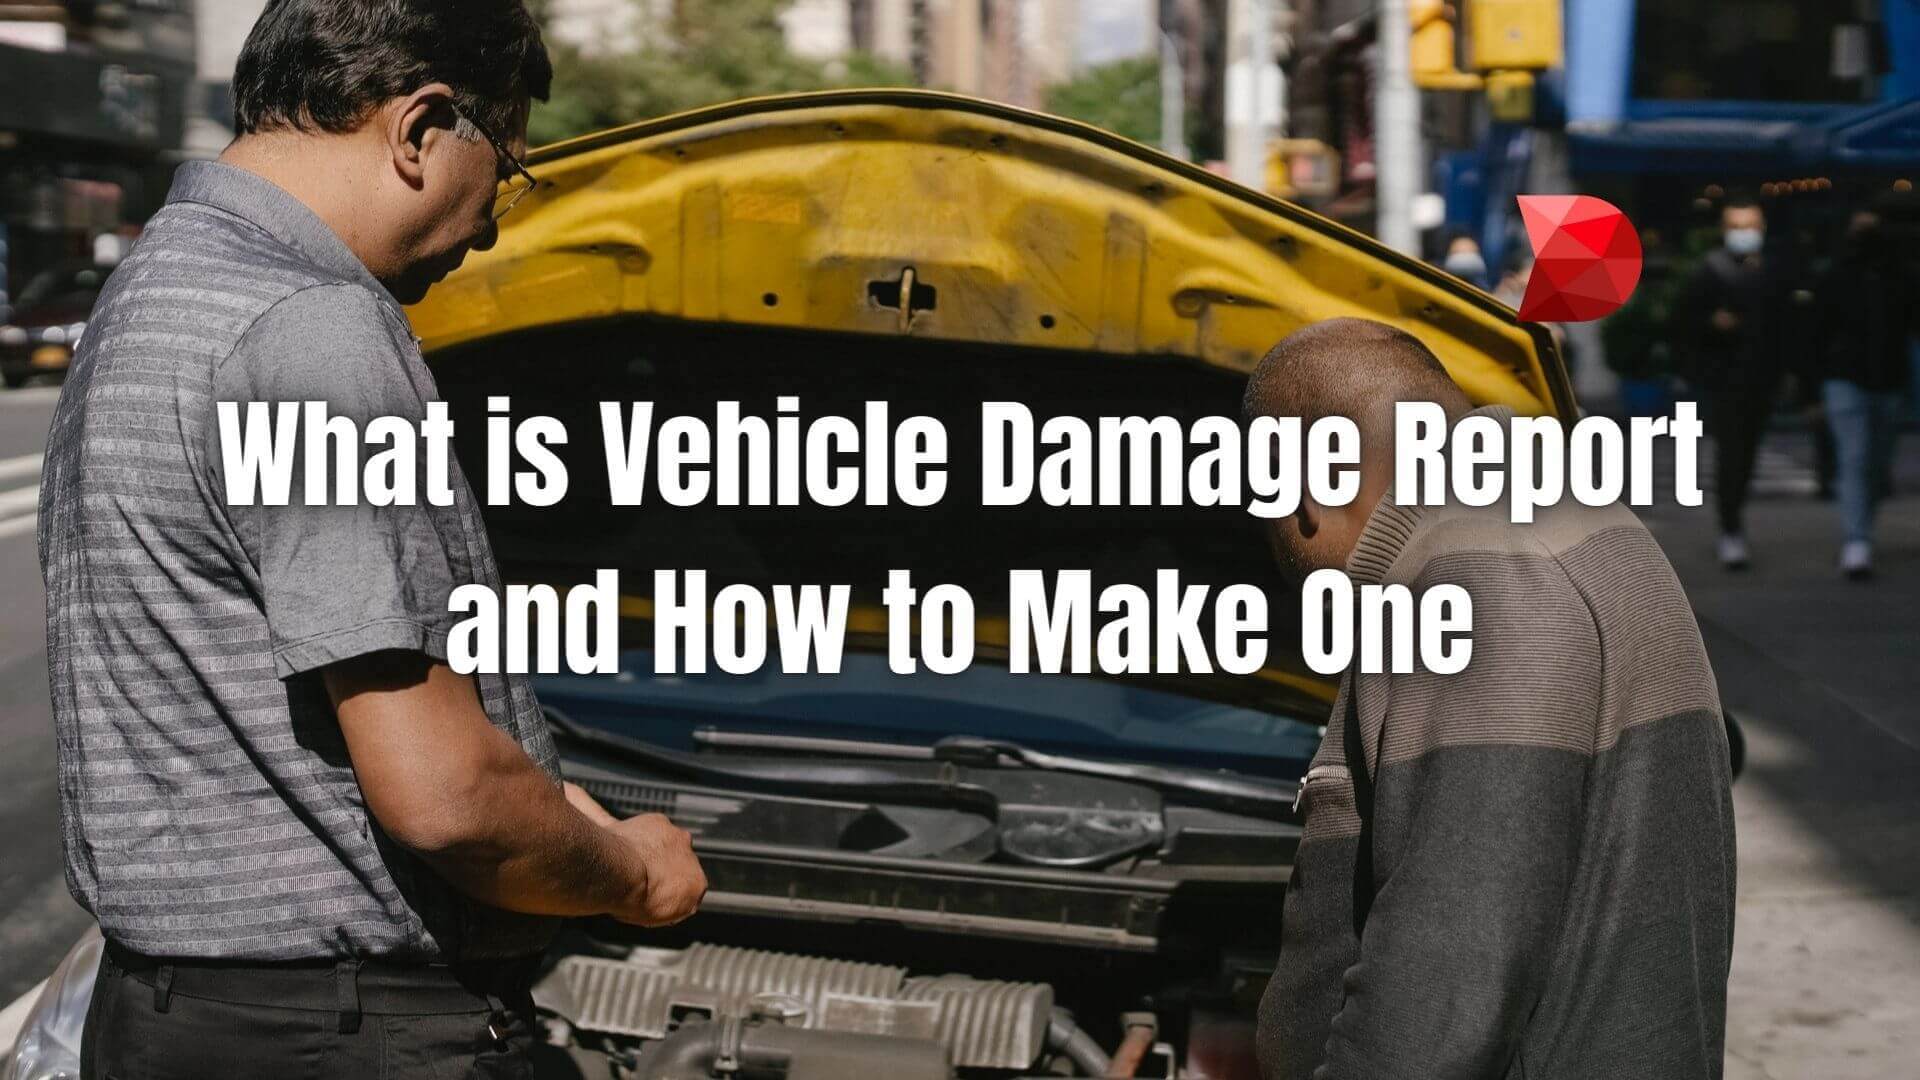 What is Vehicle Damage Report and How to Make One